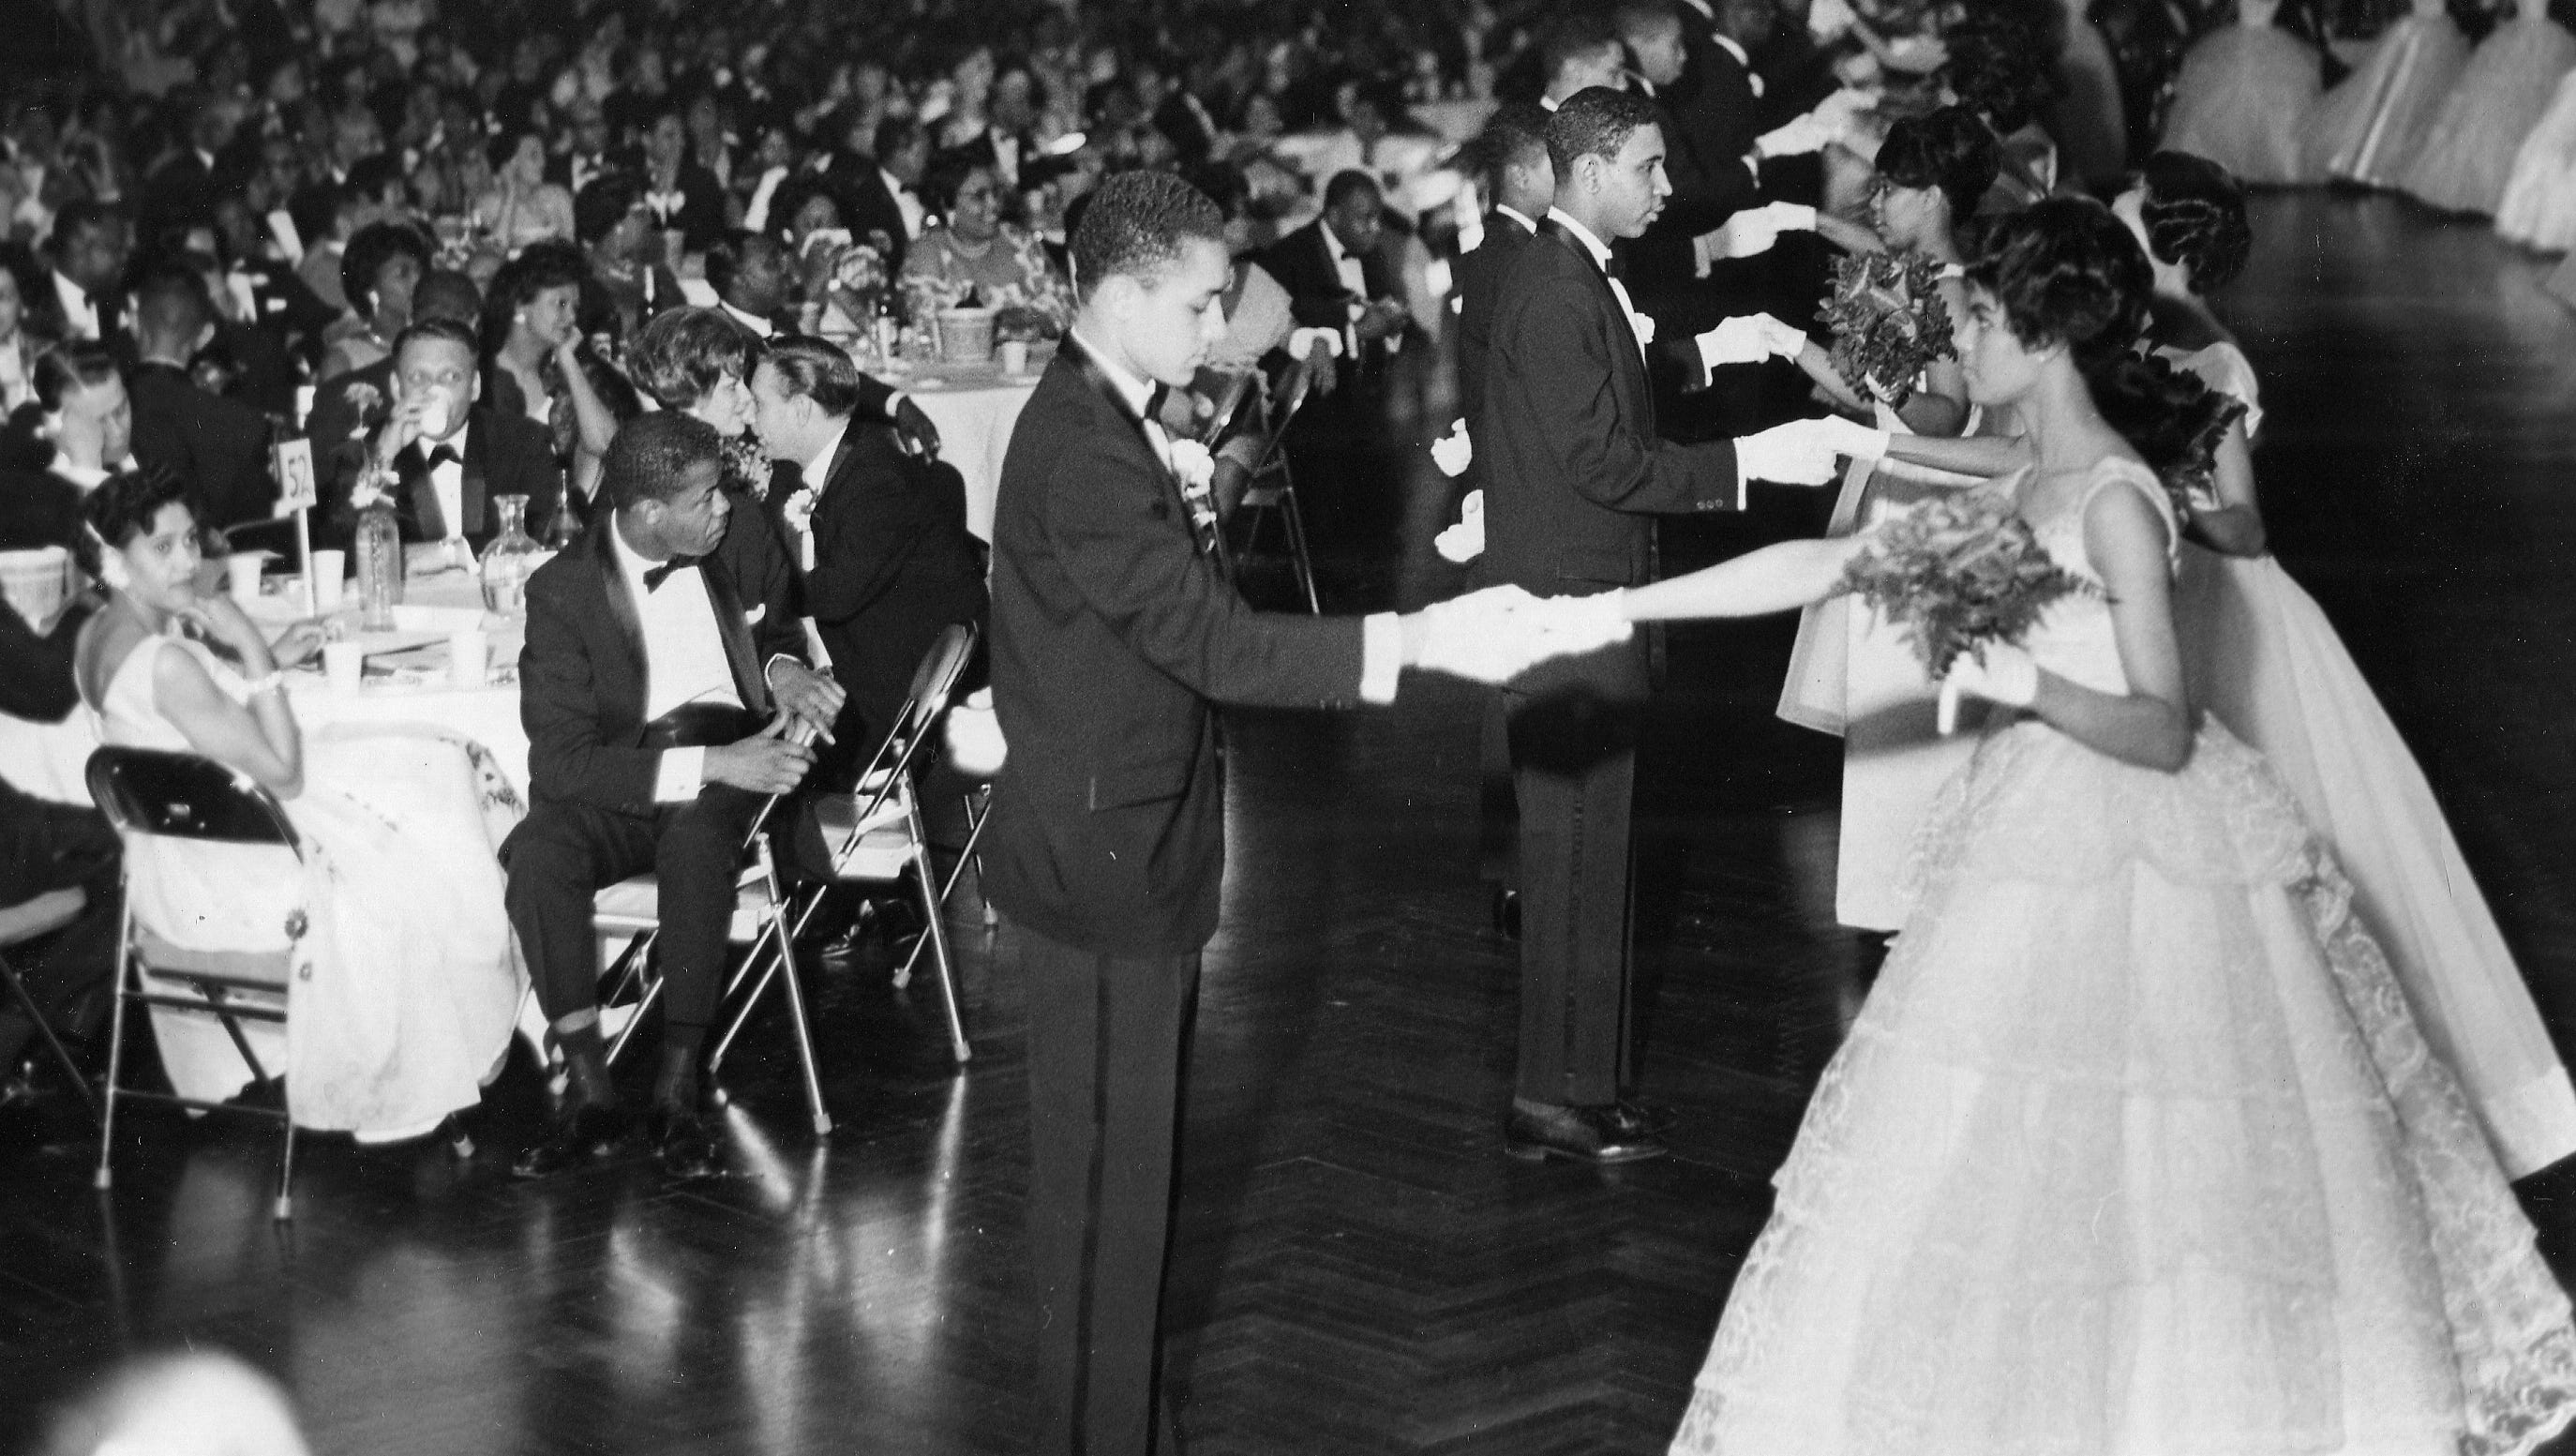 Young Detroiters dance at a debutante ball in Cobo on May 23, 1962.